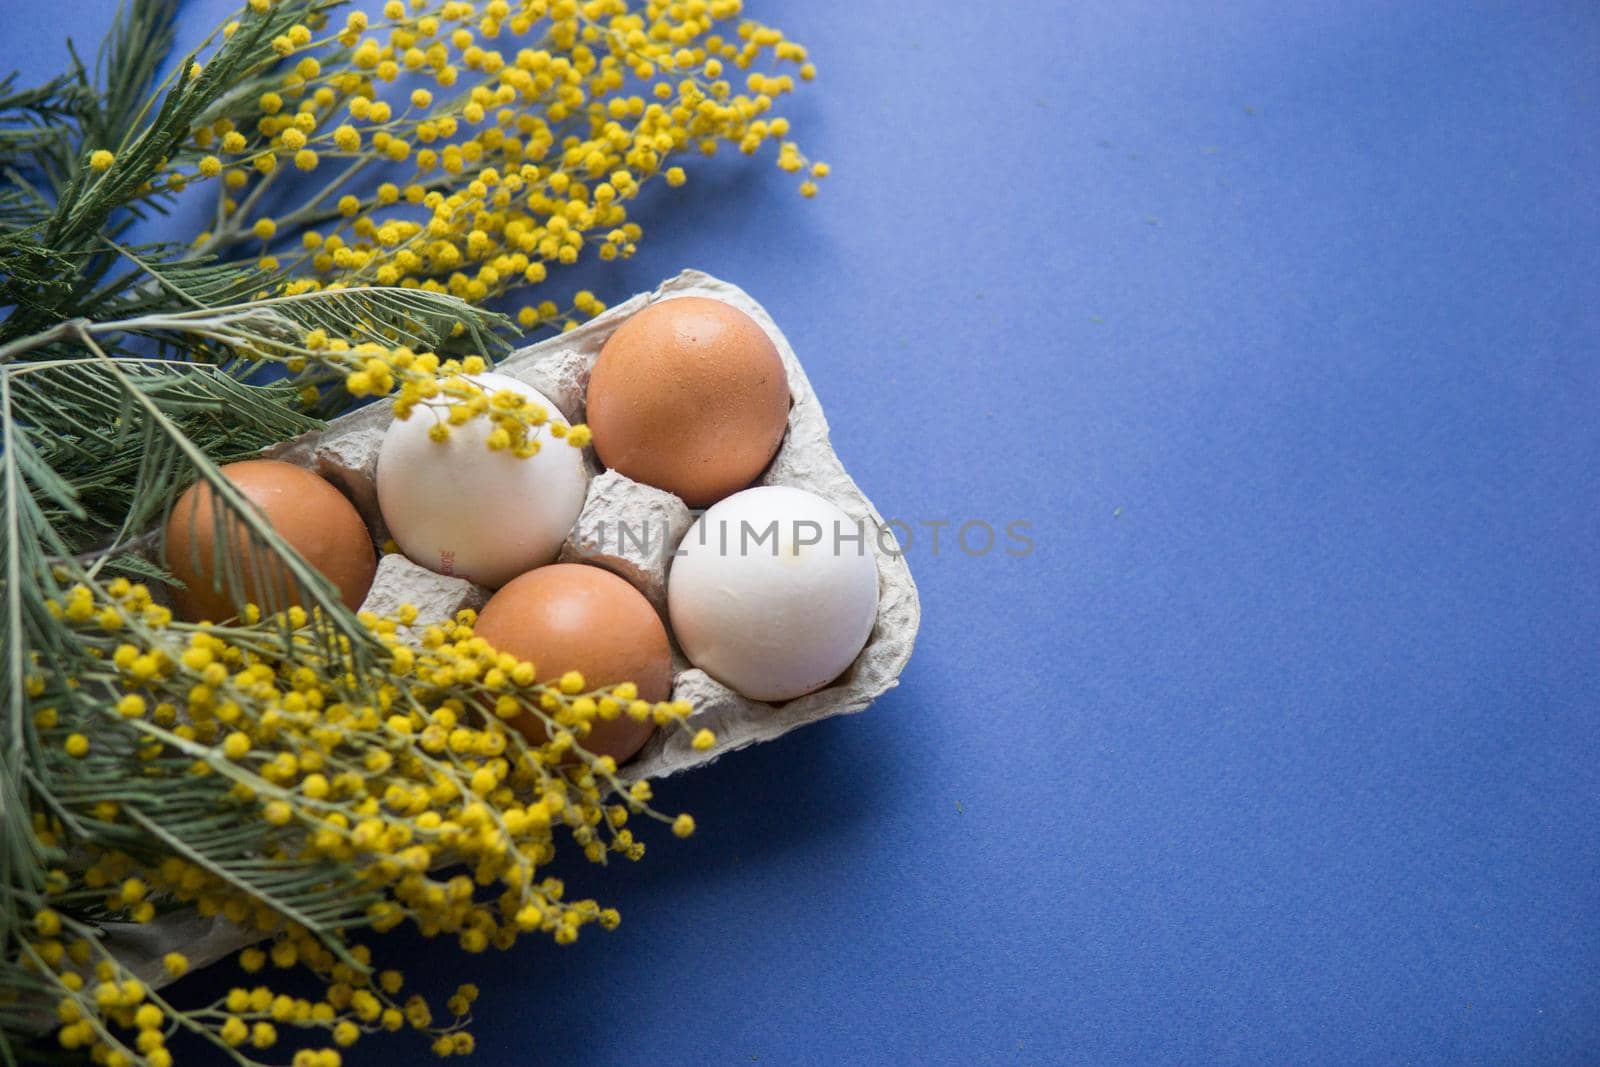 Easter background, eggs on a blue background, decorated with Mimosa flowers, flatlay, top view, empty space for text. by Annu1tochka